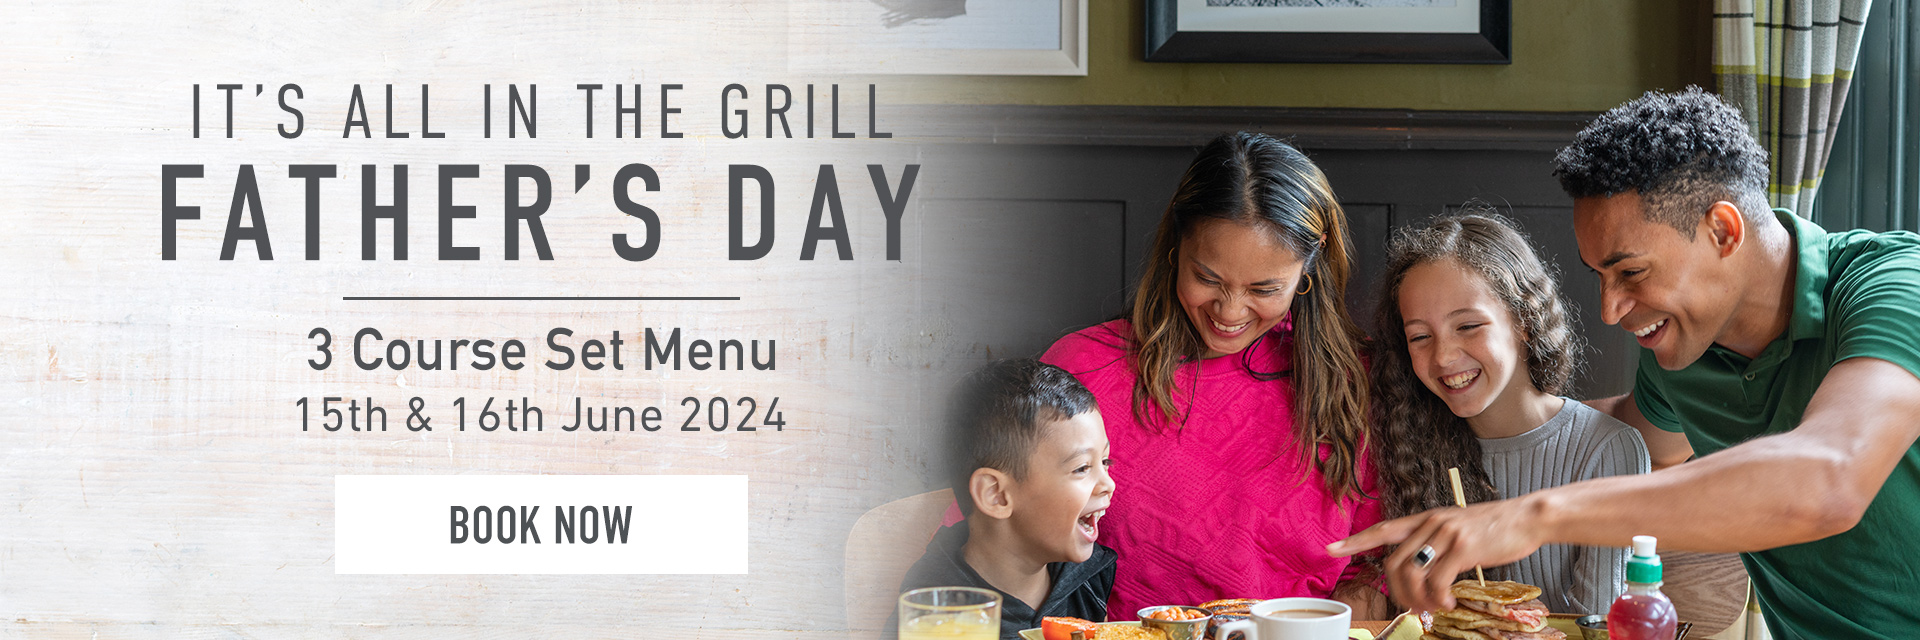 Father’s Day at Harvester Borderer